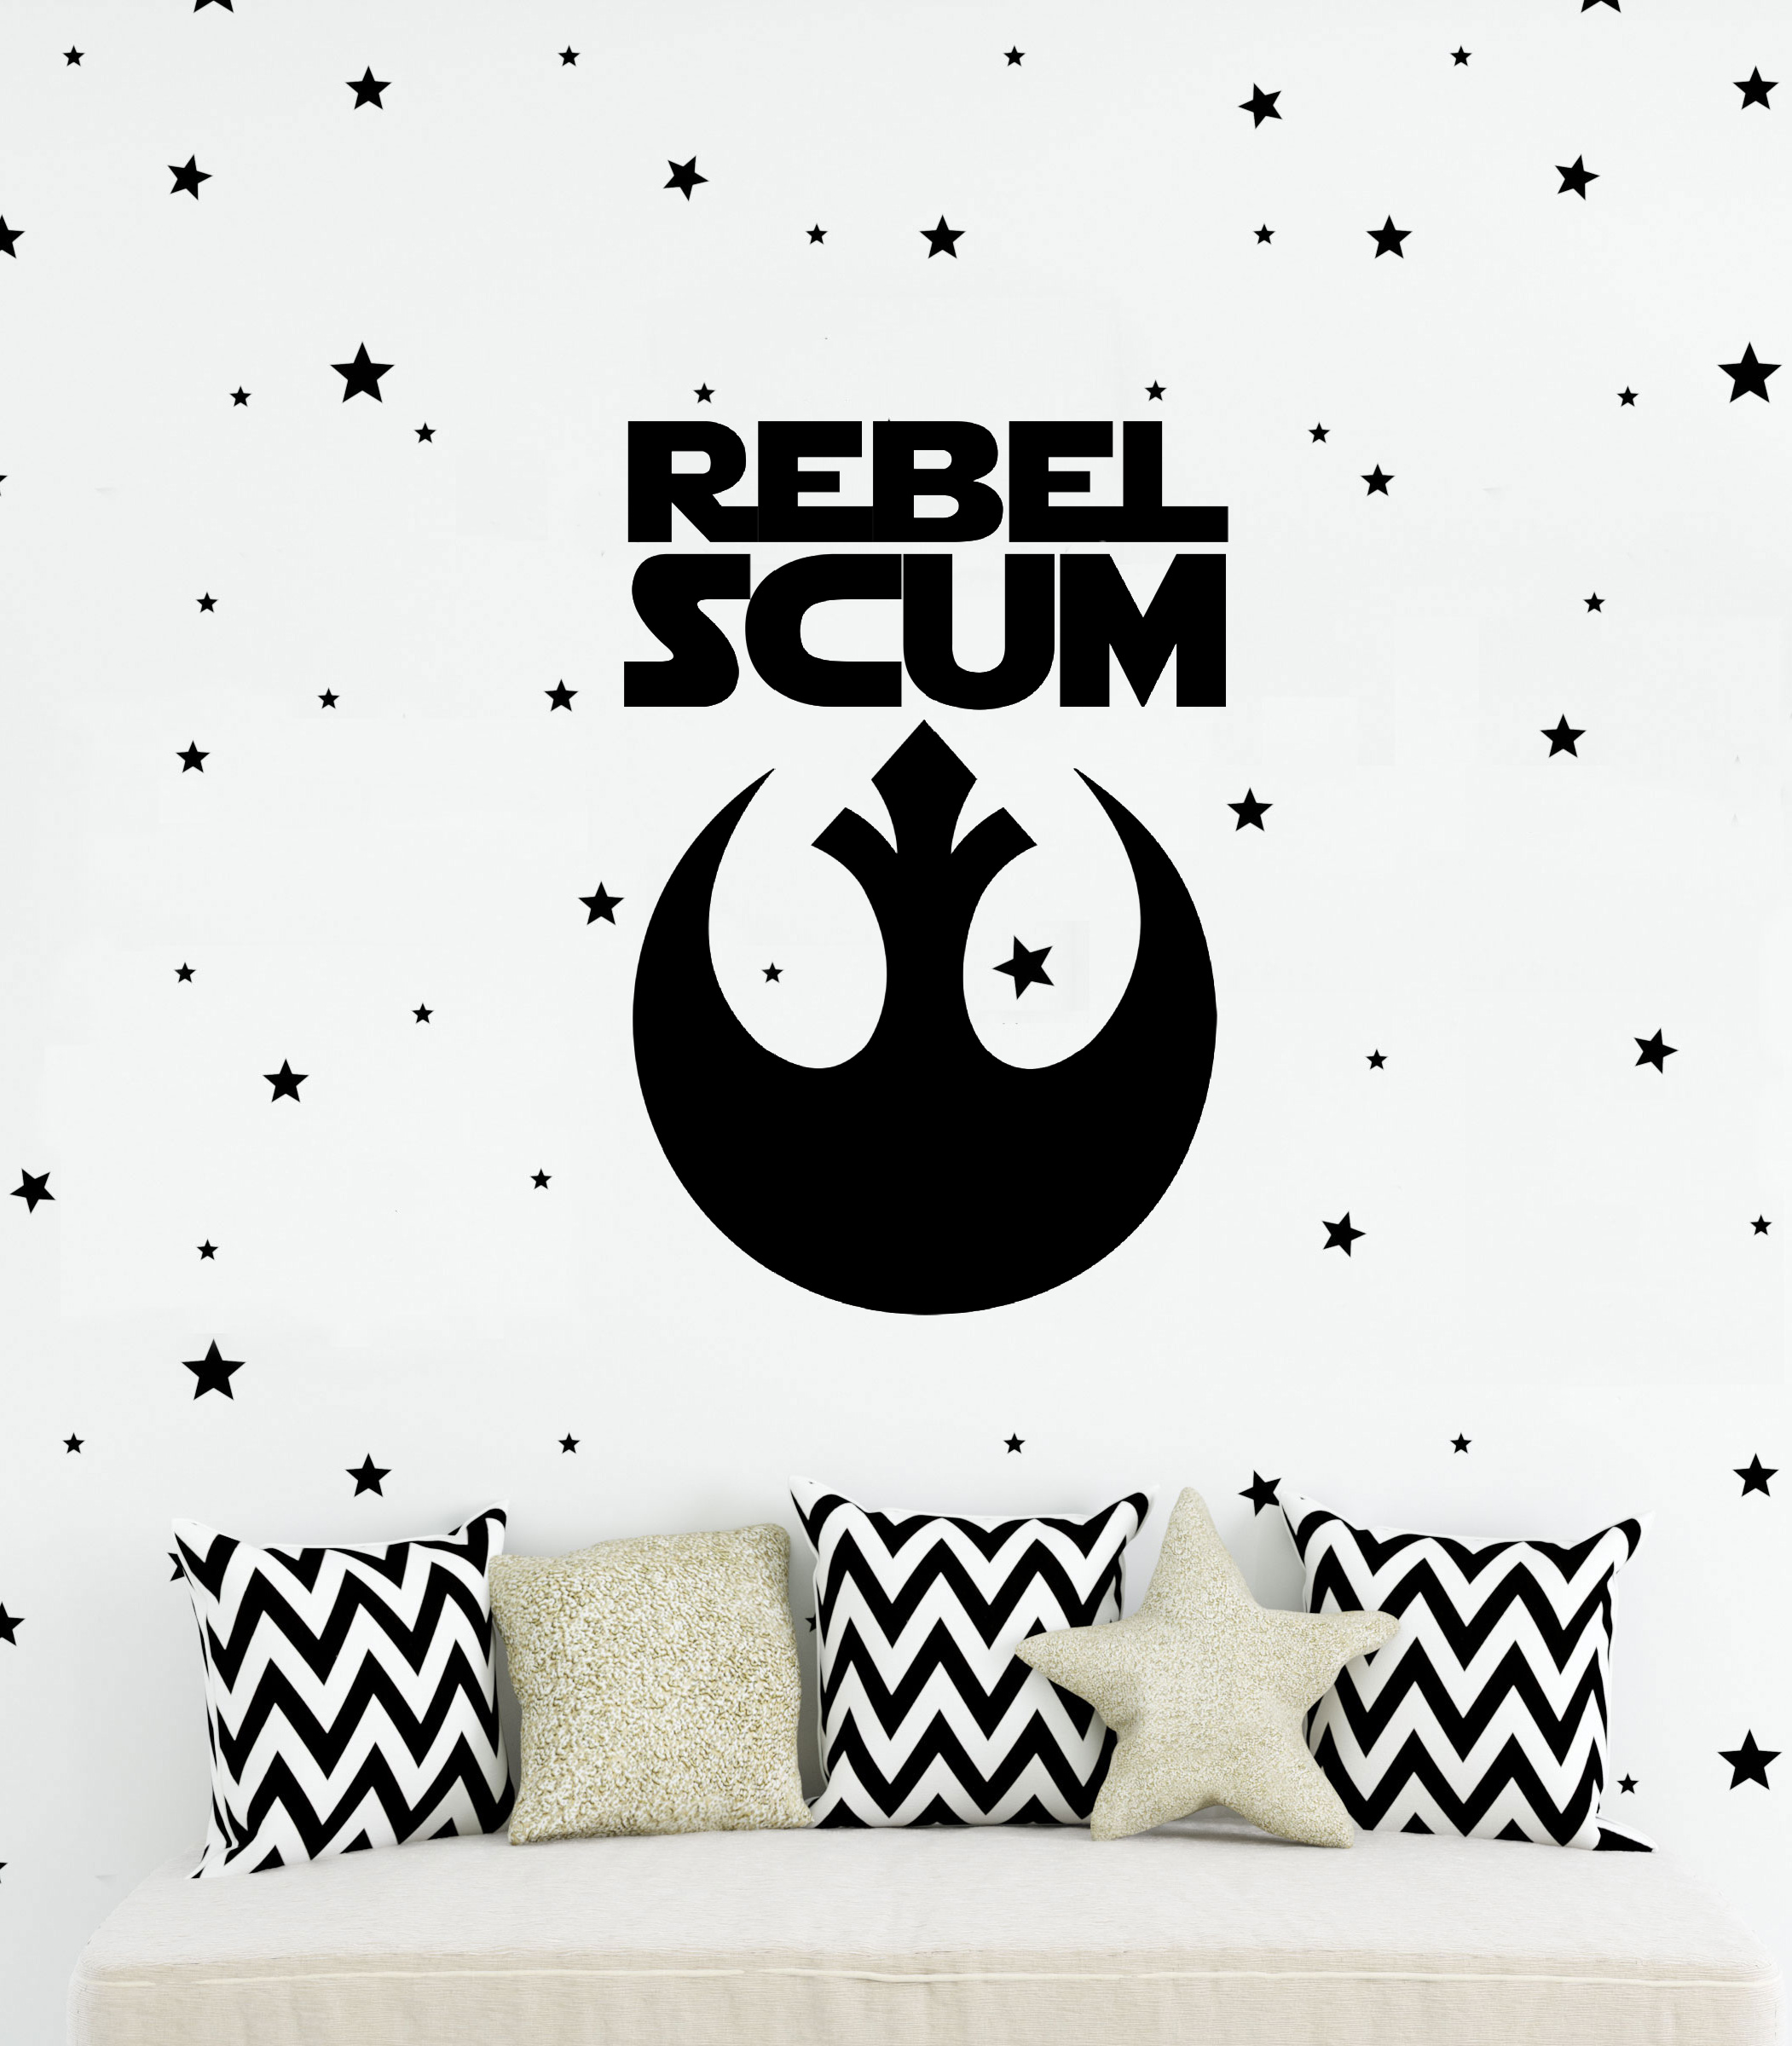 Rebel Scum Wall Decal on a bedroom wall above a bench with pillows